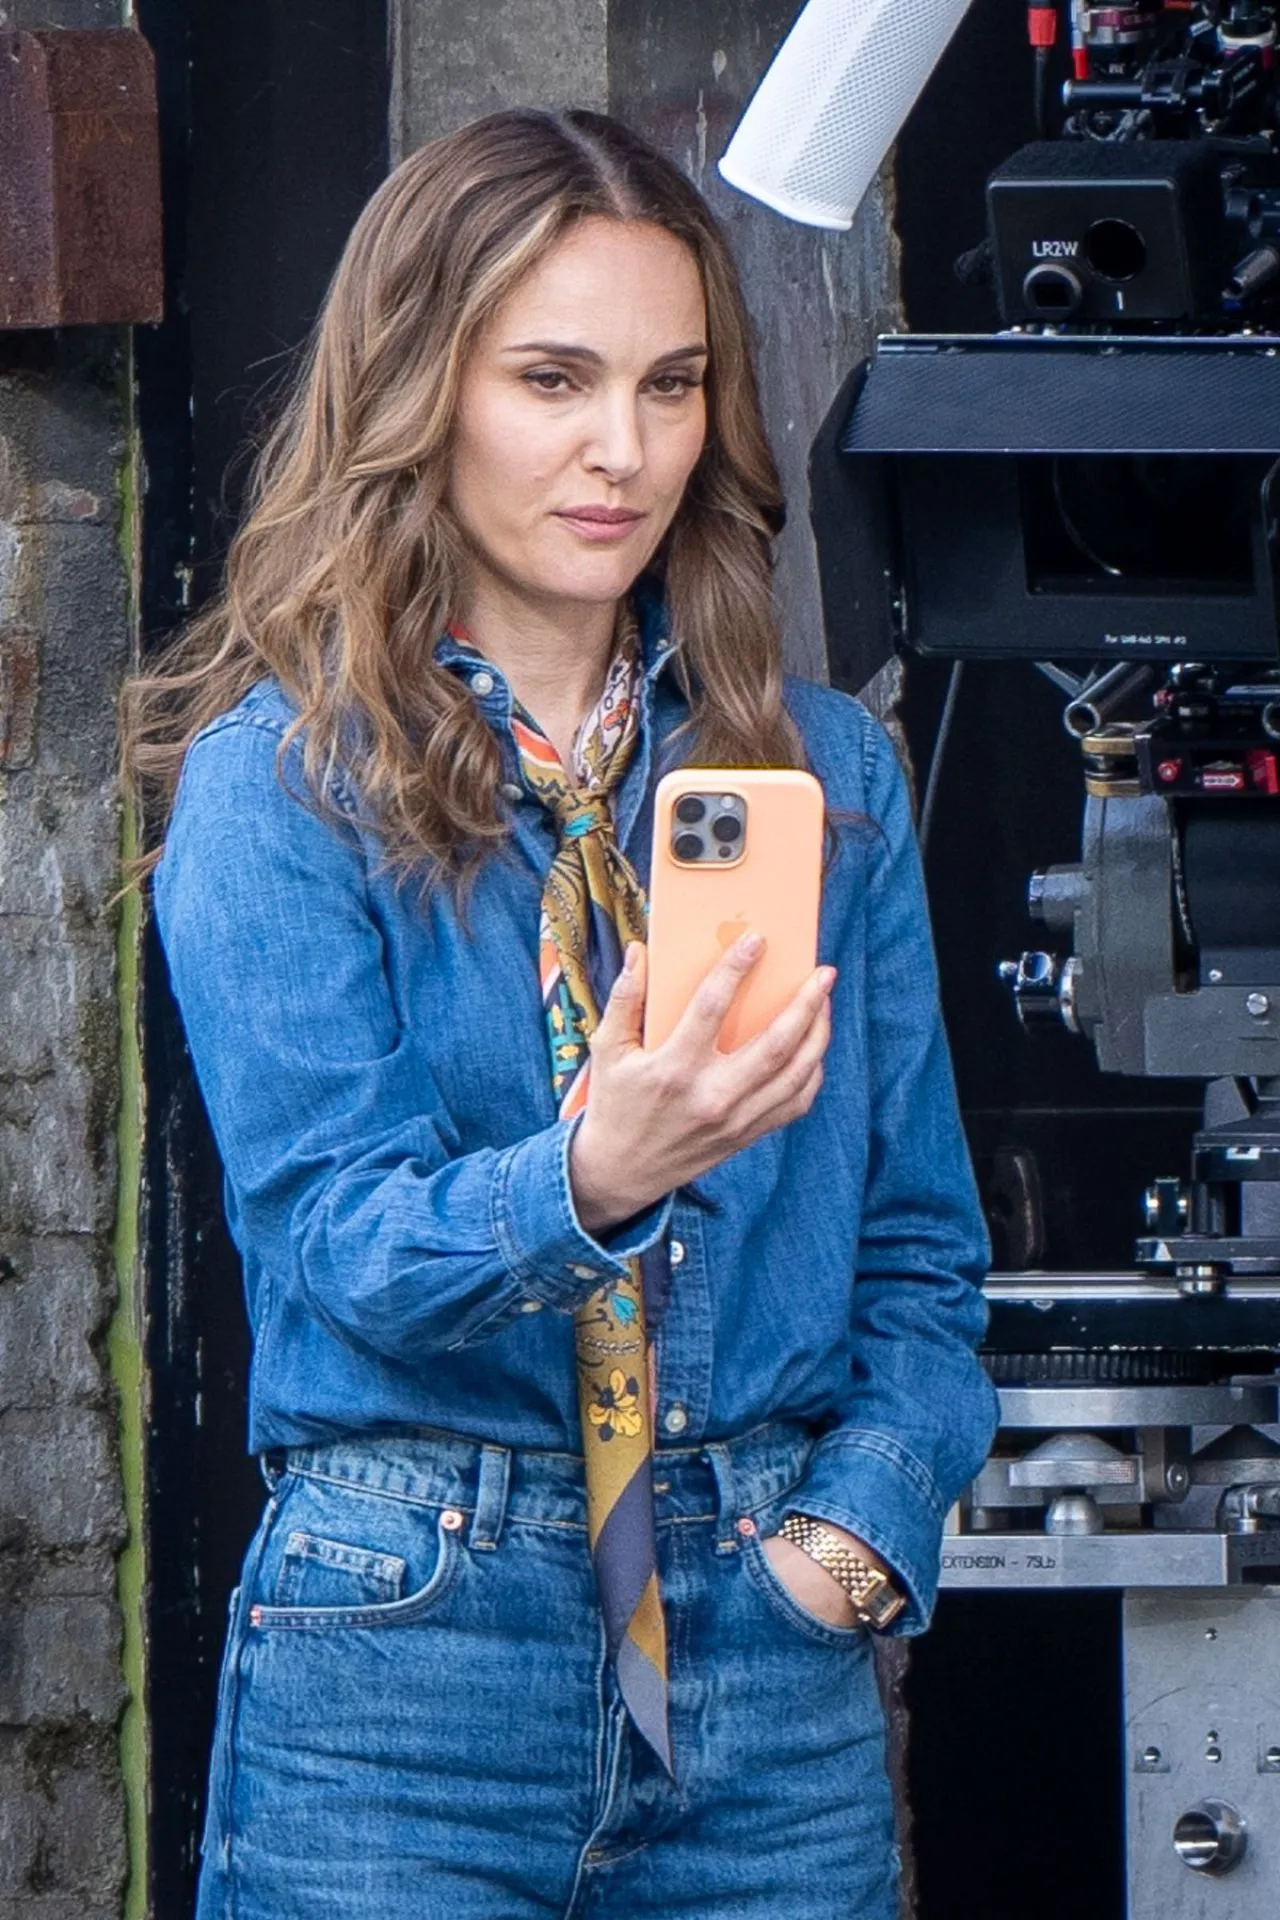 NATALIE PORTMAN ON THE SET OF FOUNTAIN OF YOUTH IN LONDON1